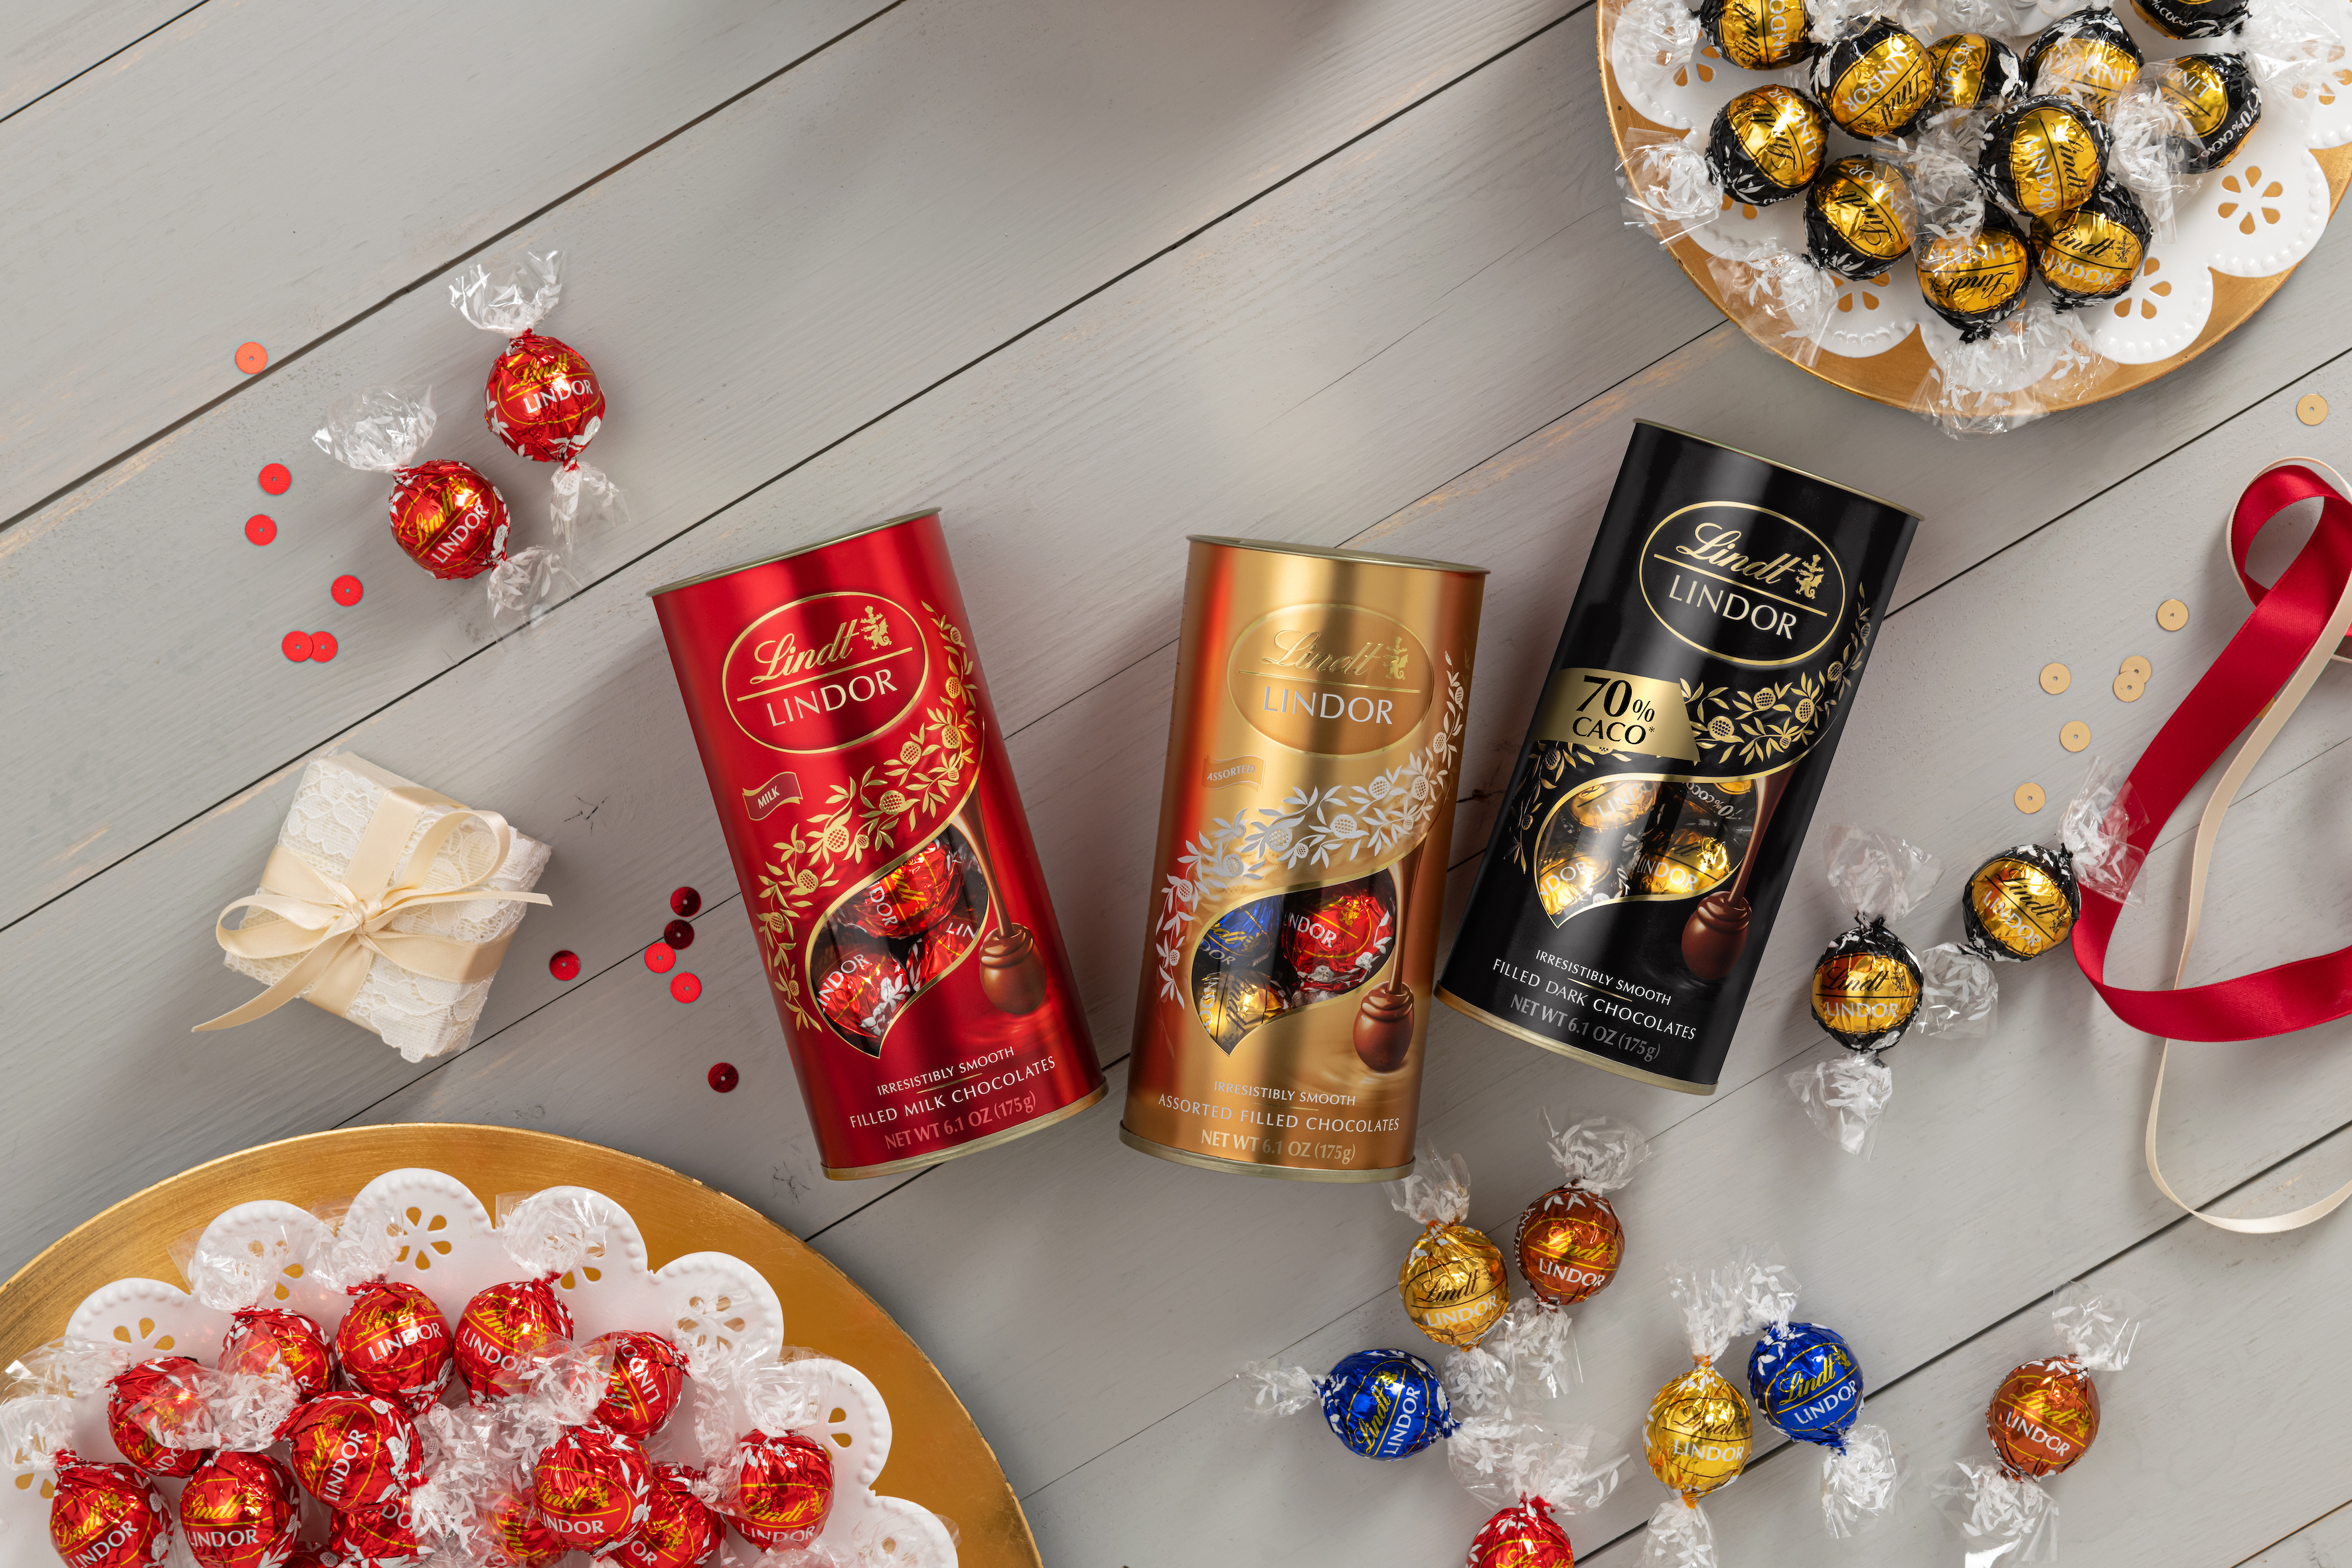 Lindt & Sprüngli Travel Retail announces magical product line-up for TFWA World Exhibition & Conference